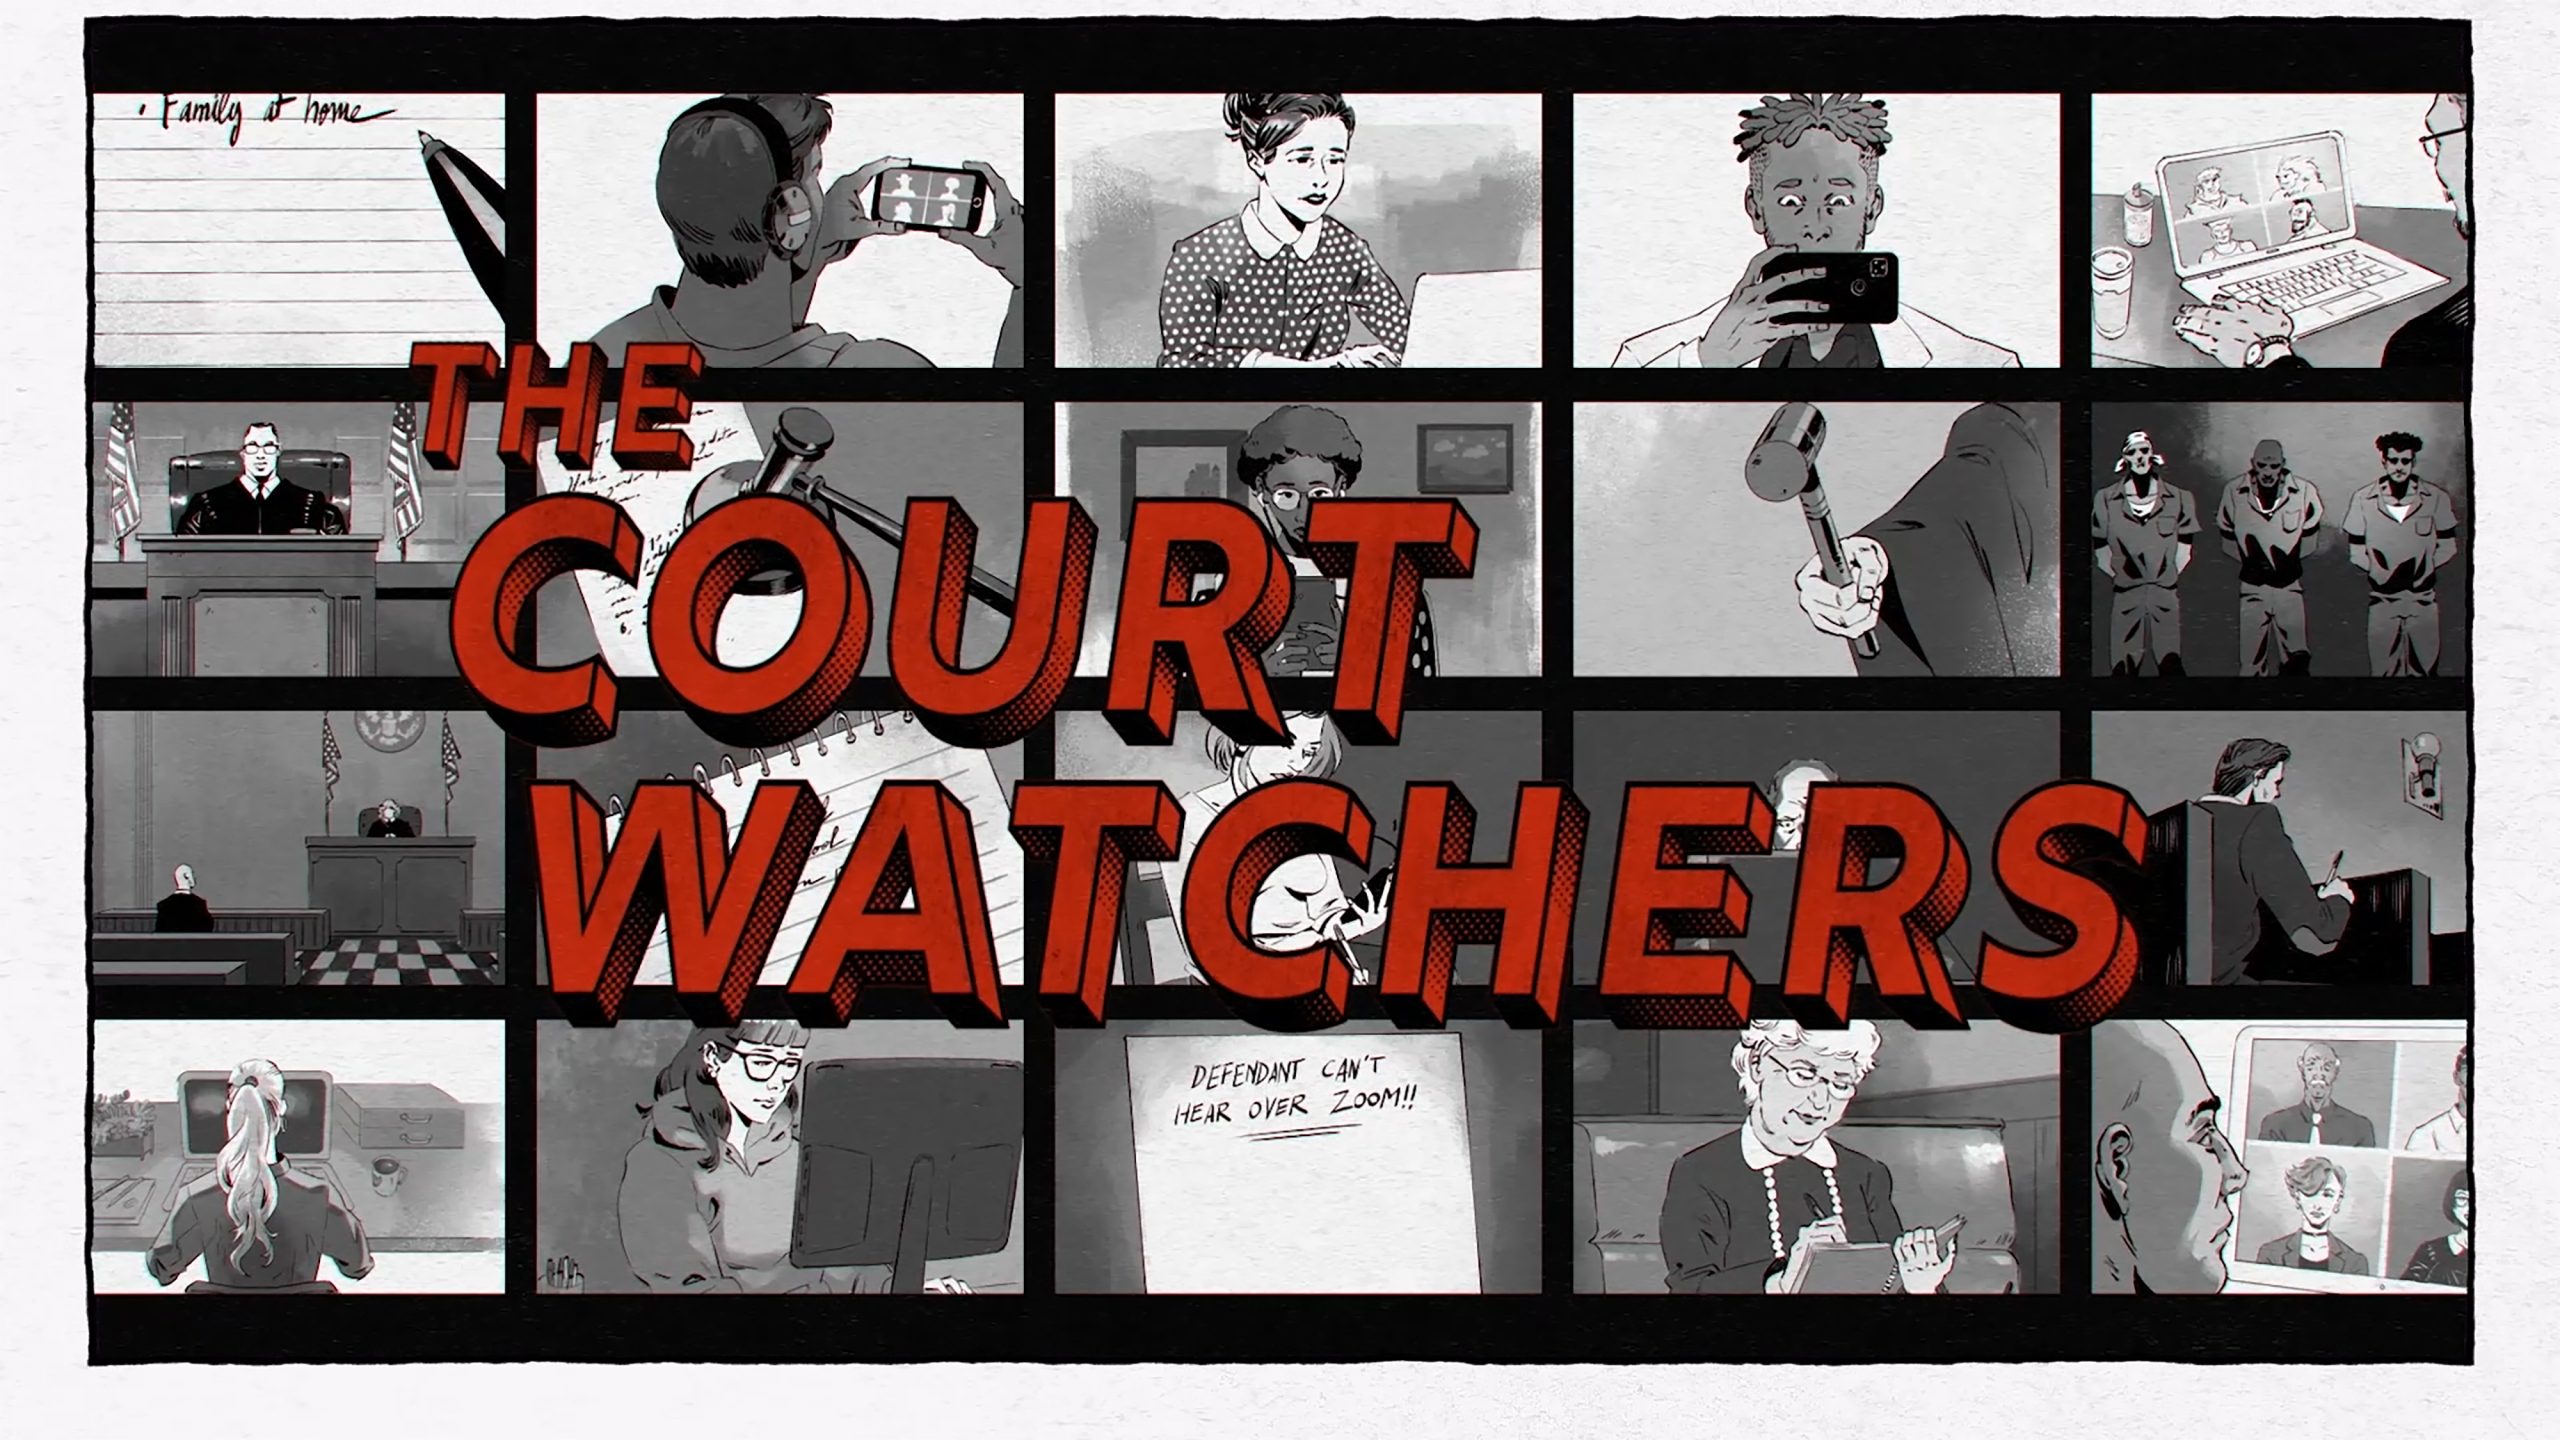 An animated short shows court watchers viewing hearings, observing and writing down injustices in notes. Bold lettering that says 